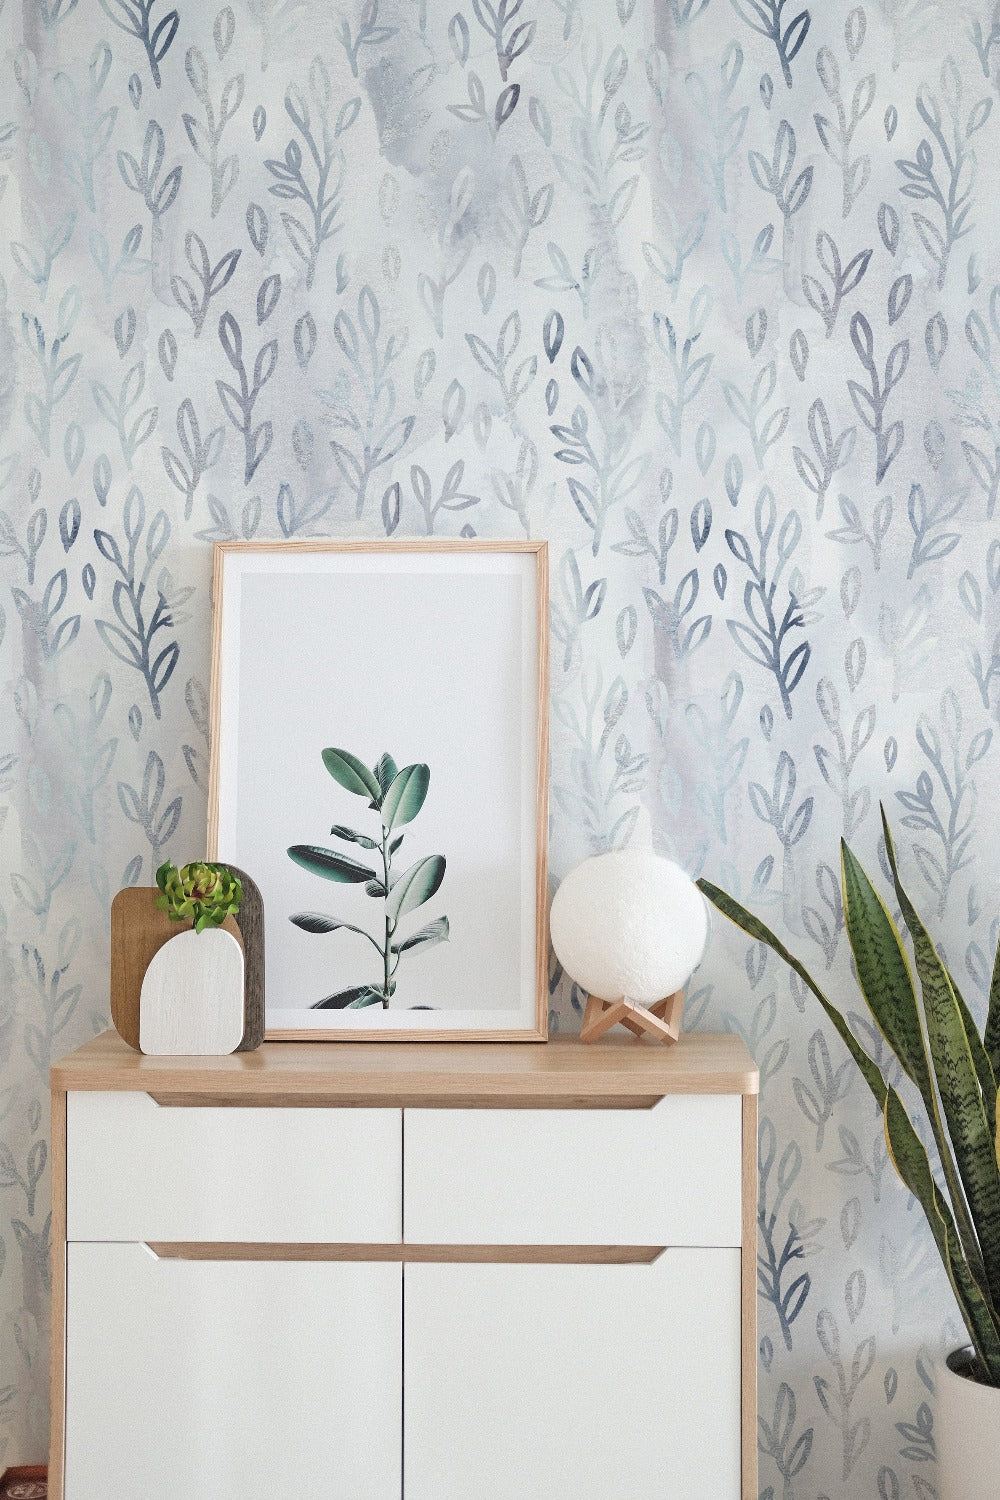 Room setup featuring Floral Foil Wallpaper II on the walls, complemented by minimalistic decor including a framed botanical print and modern furniture. The wallpaper adds a gentle, nature-inspired ambiance to the space.